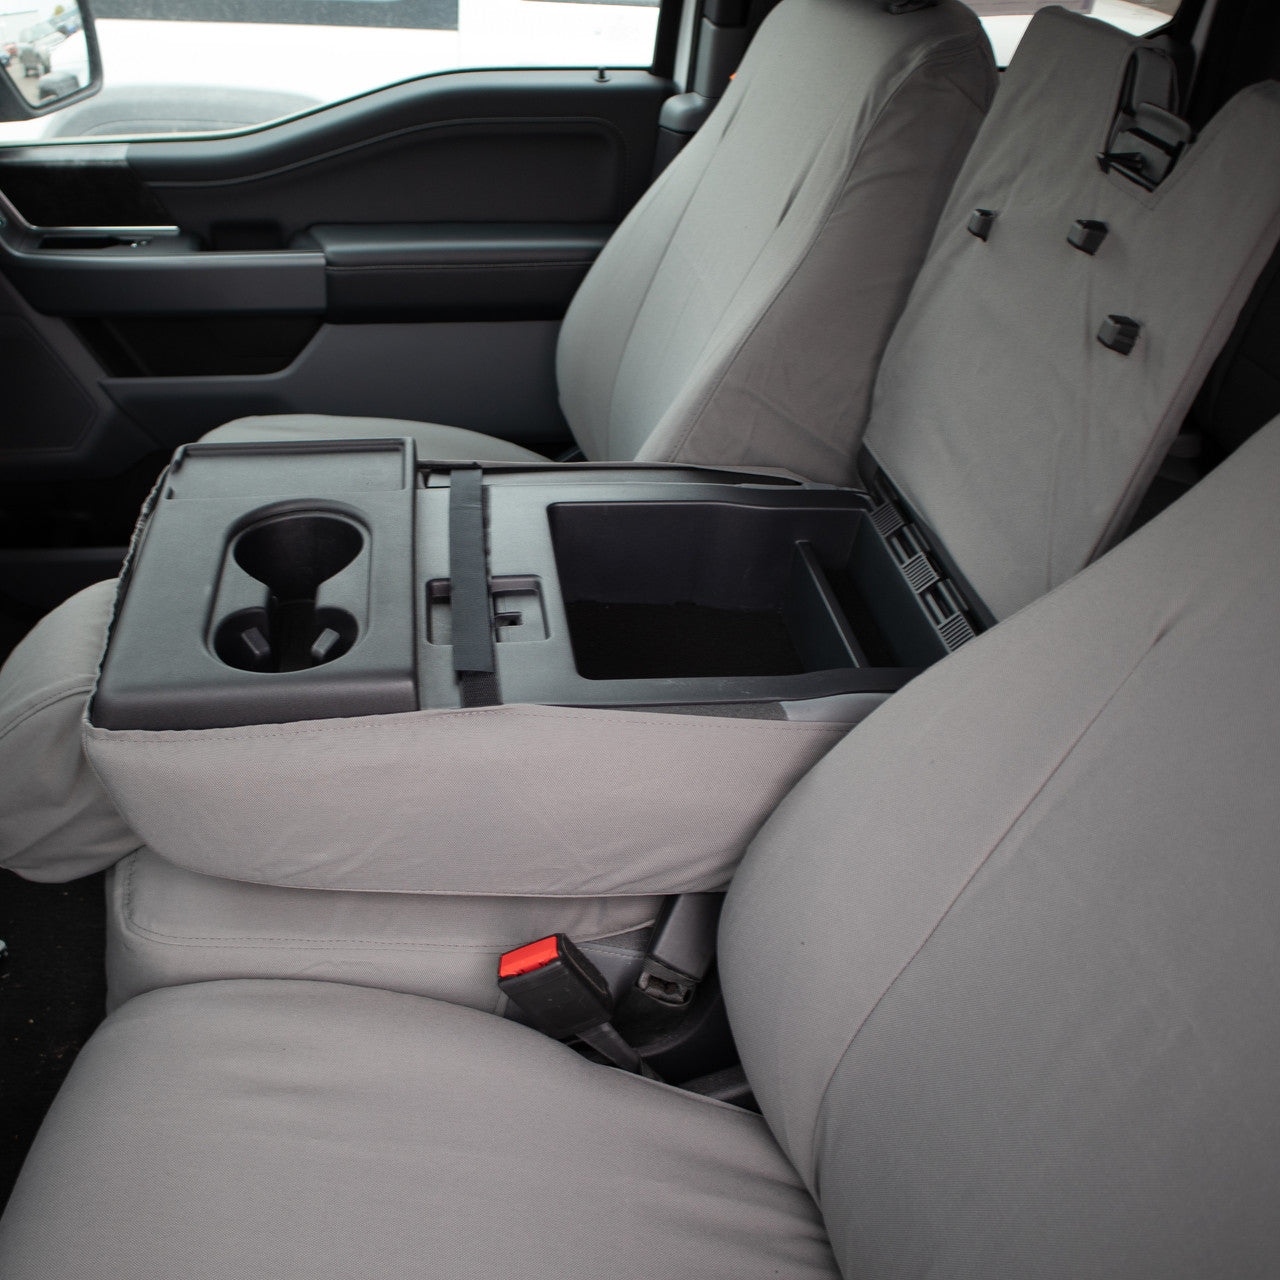 40/20/40 Antimicrobial Seat Covers for Ford Truck (W0523026)